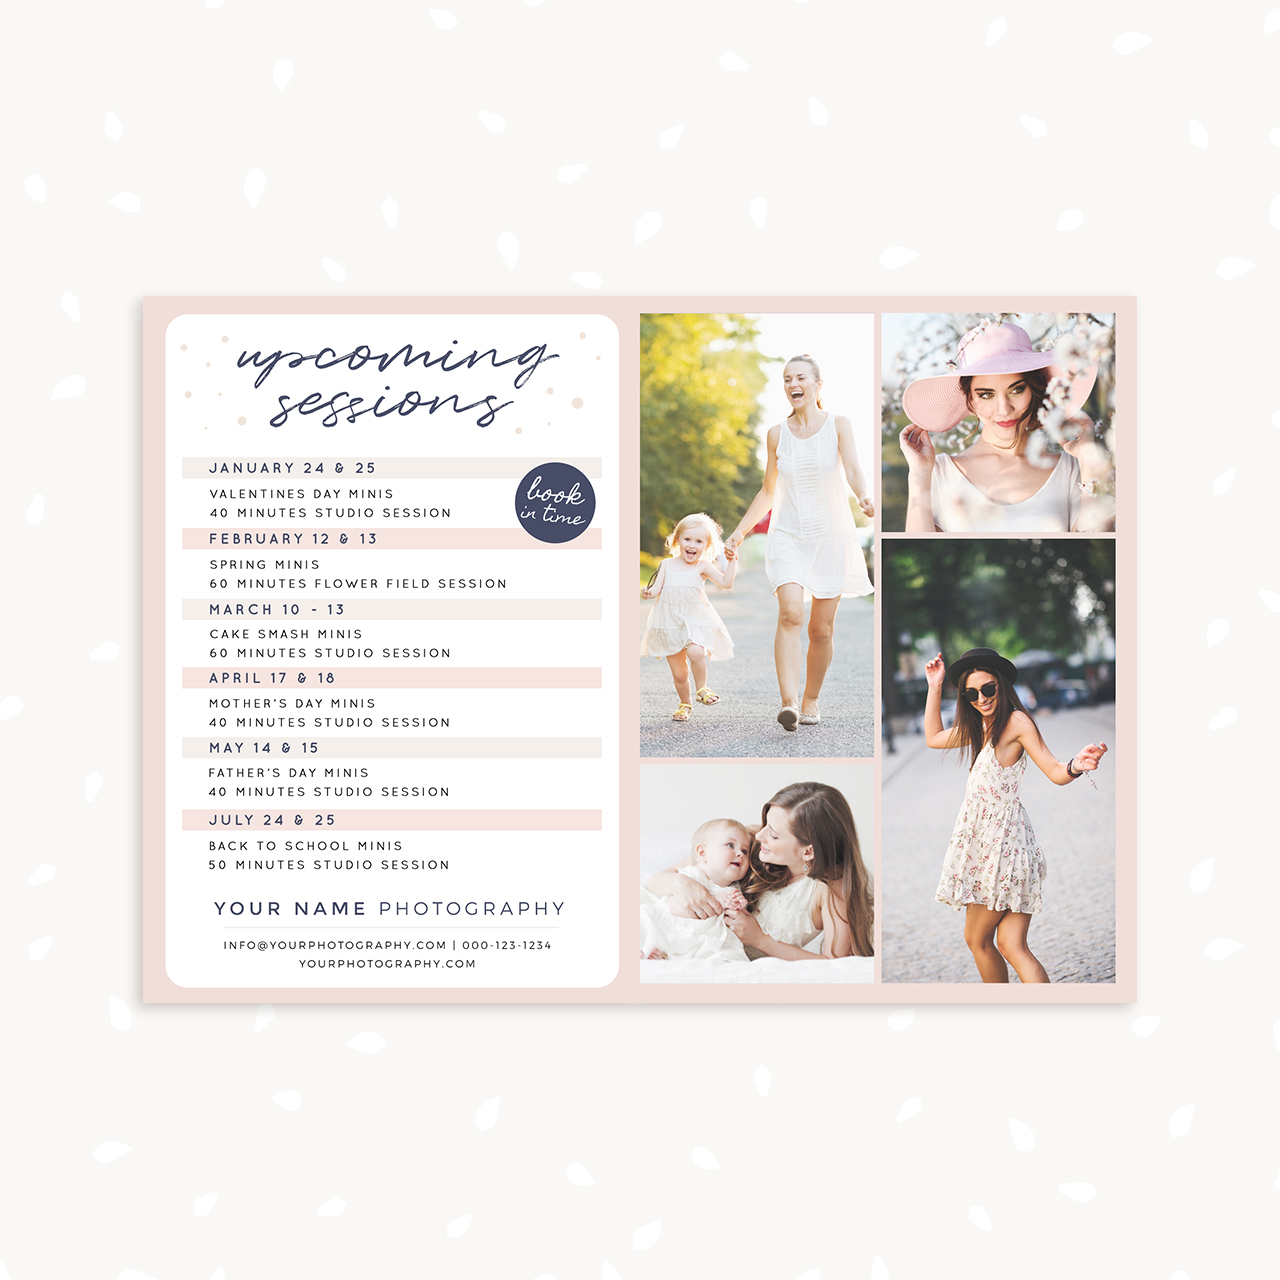 Upcoming sessions photography template